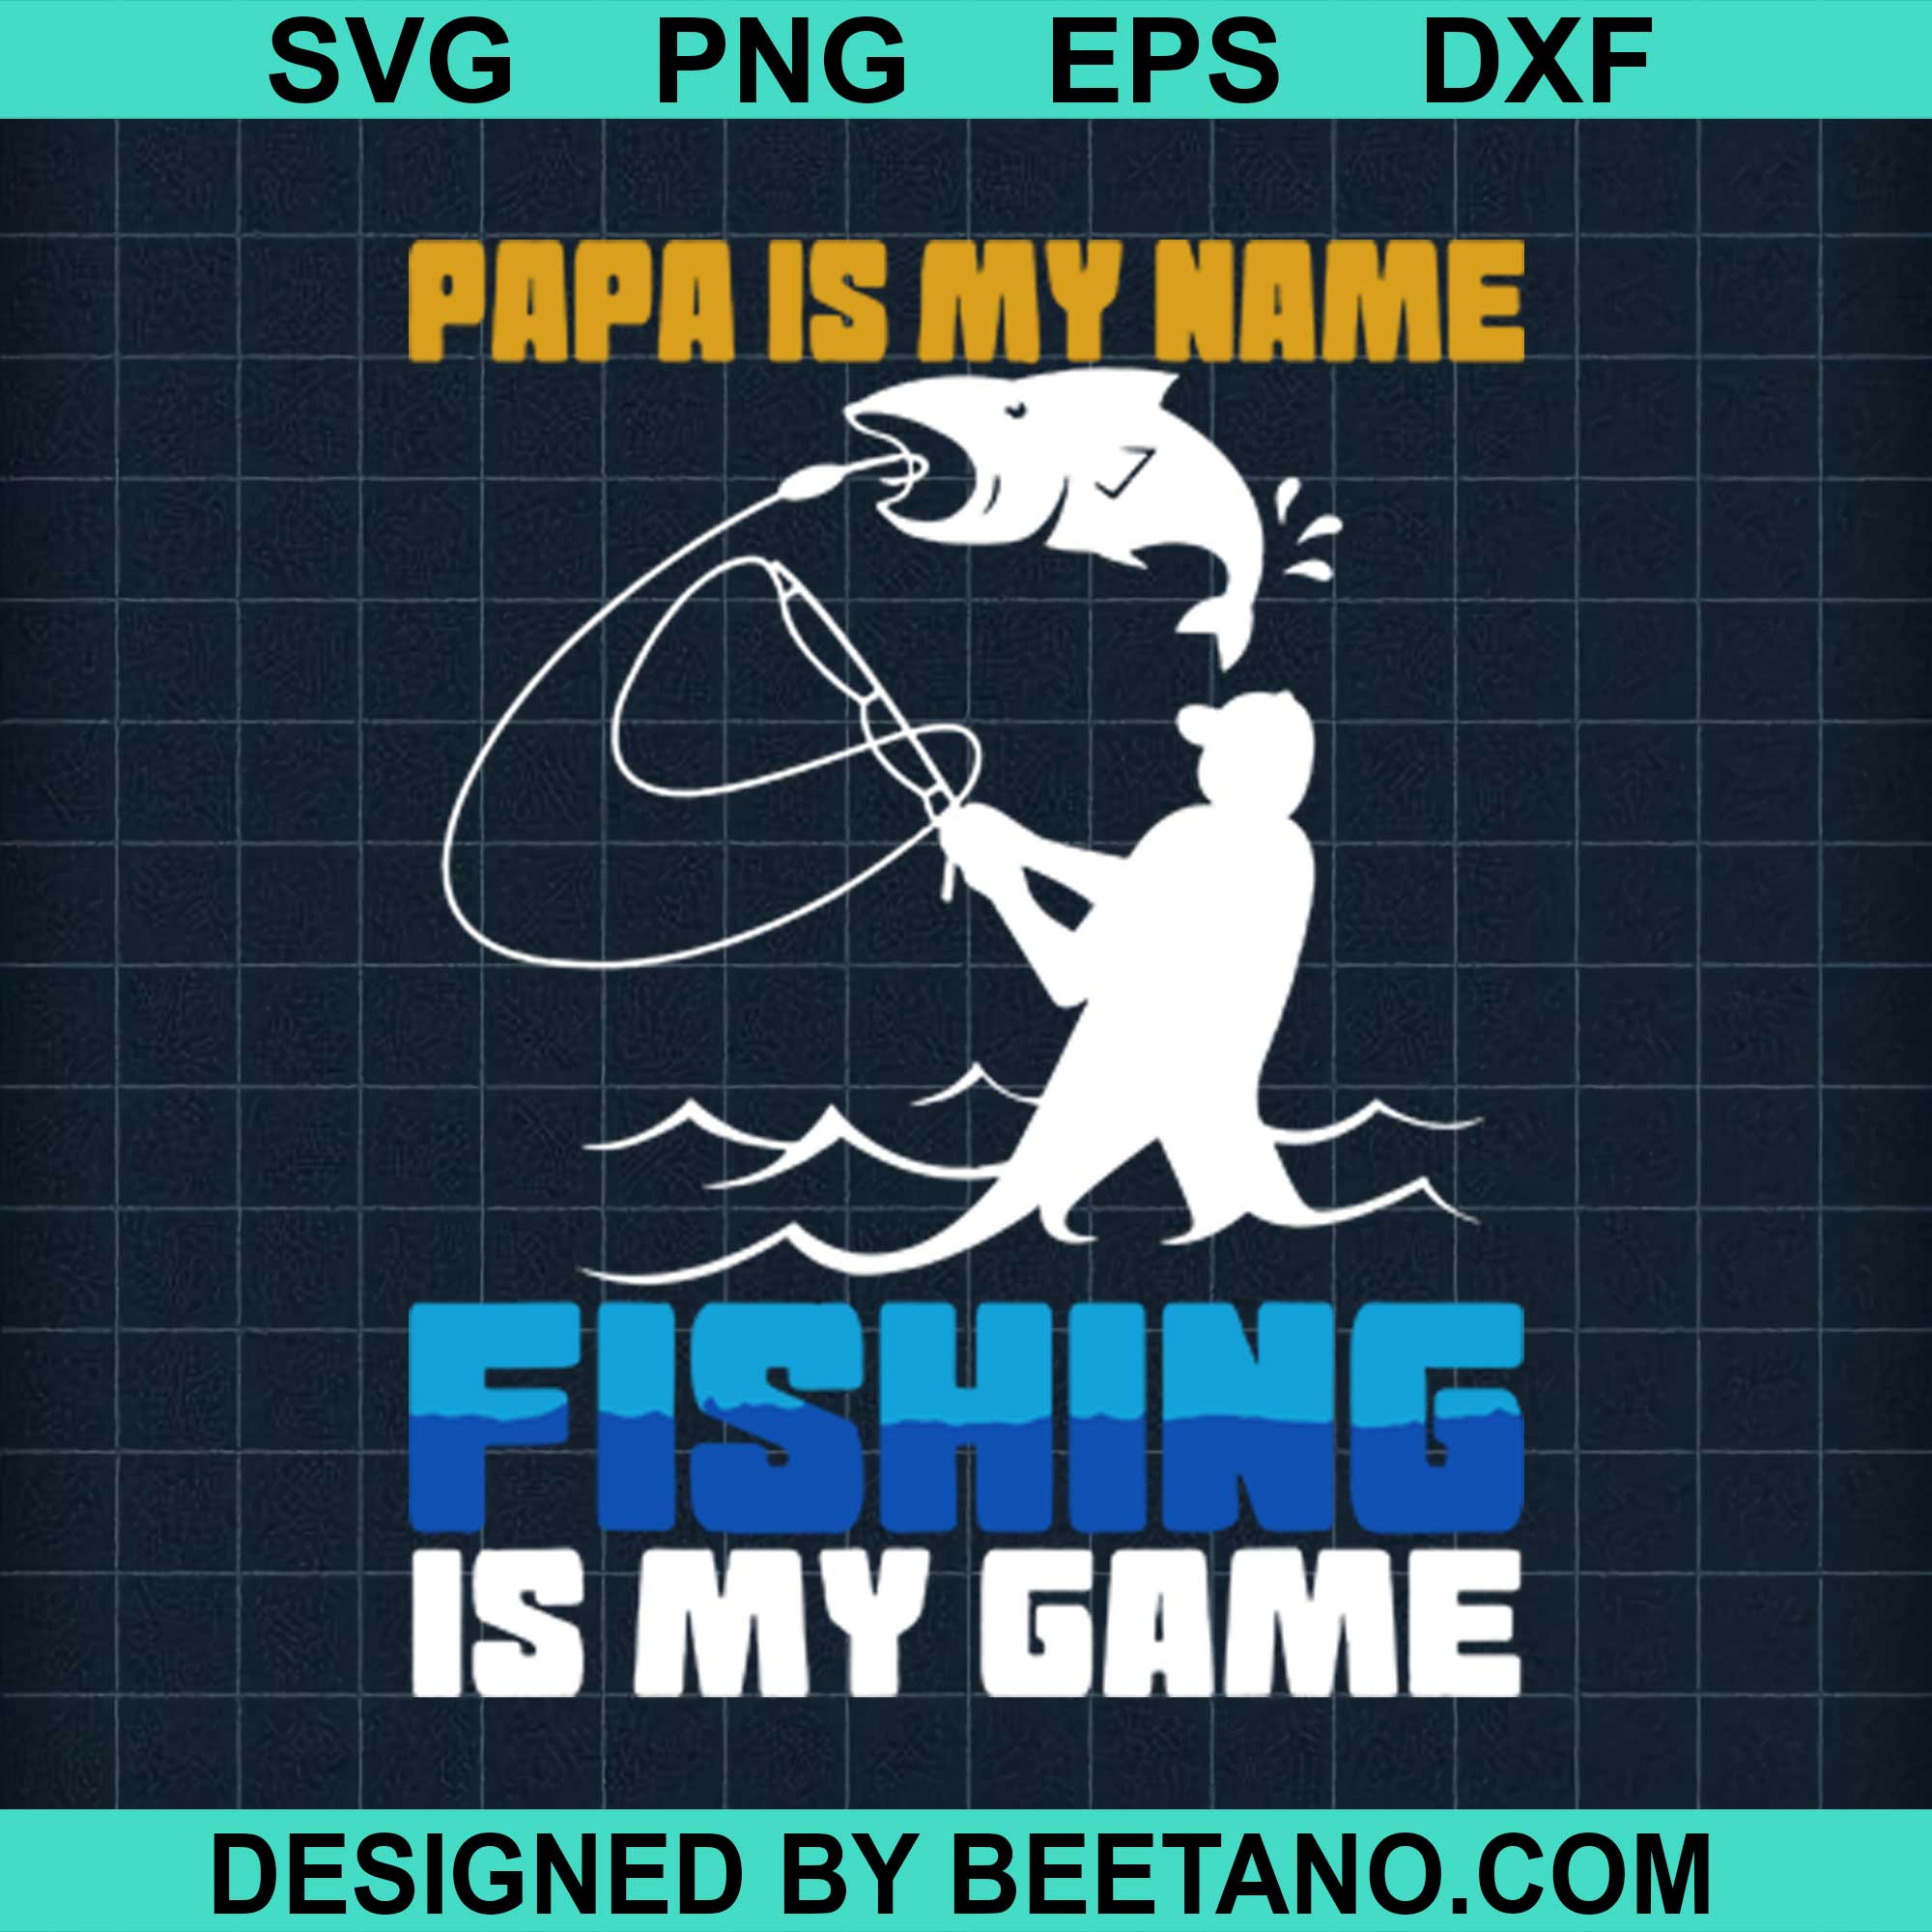 Papa Is My Name Fishing Is My Game Svg Cut File For Cricut Silhouette